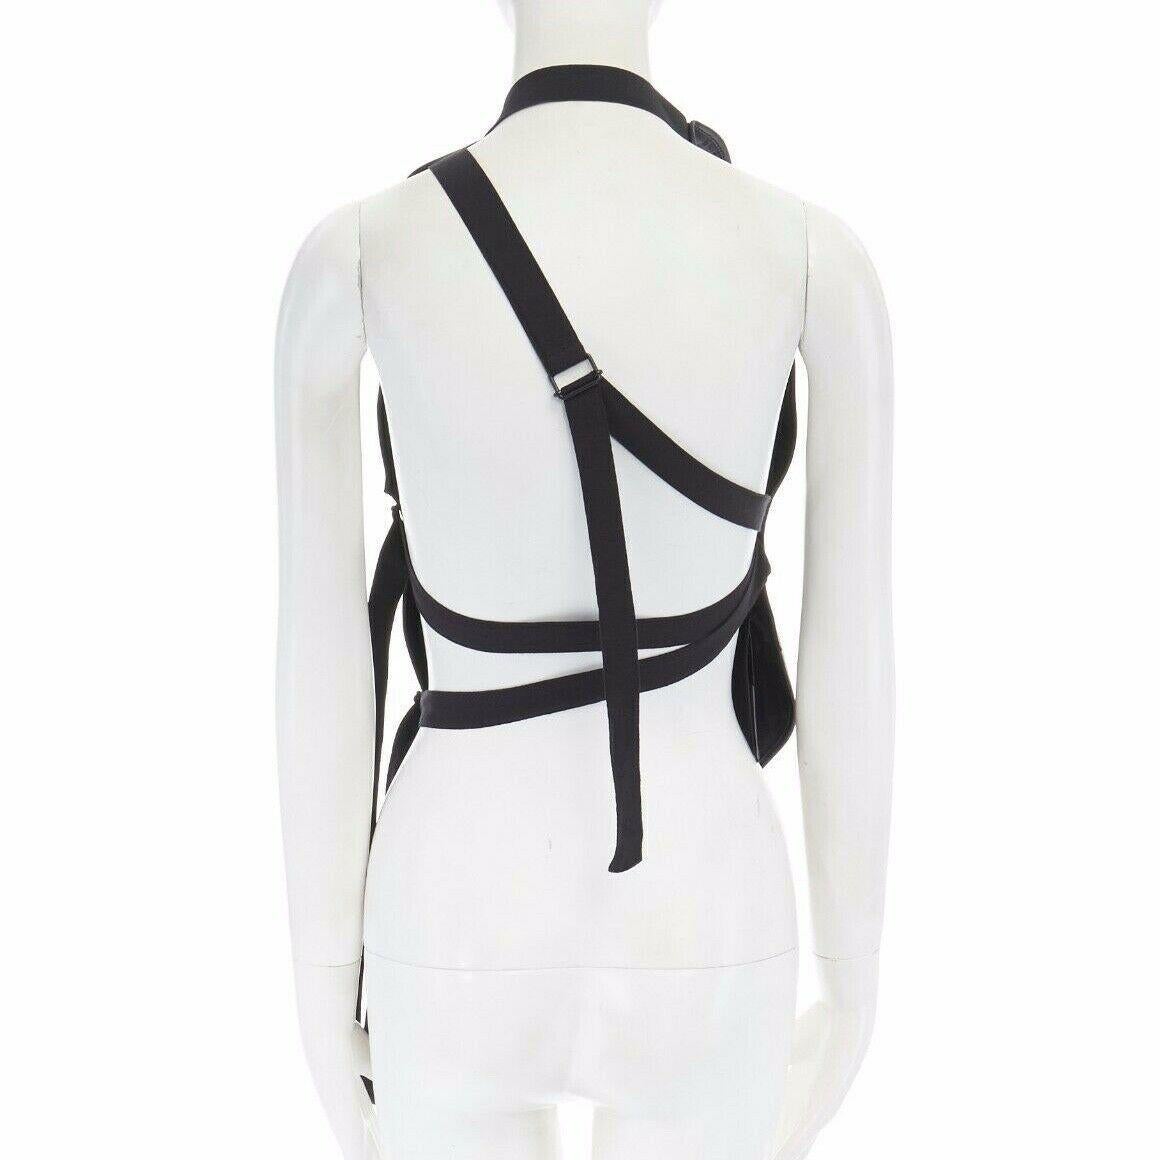 Black new ANN DEMEULEMEESTER black leather draped neck stitch strappy harness top M